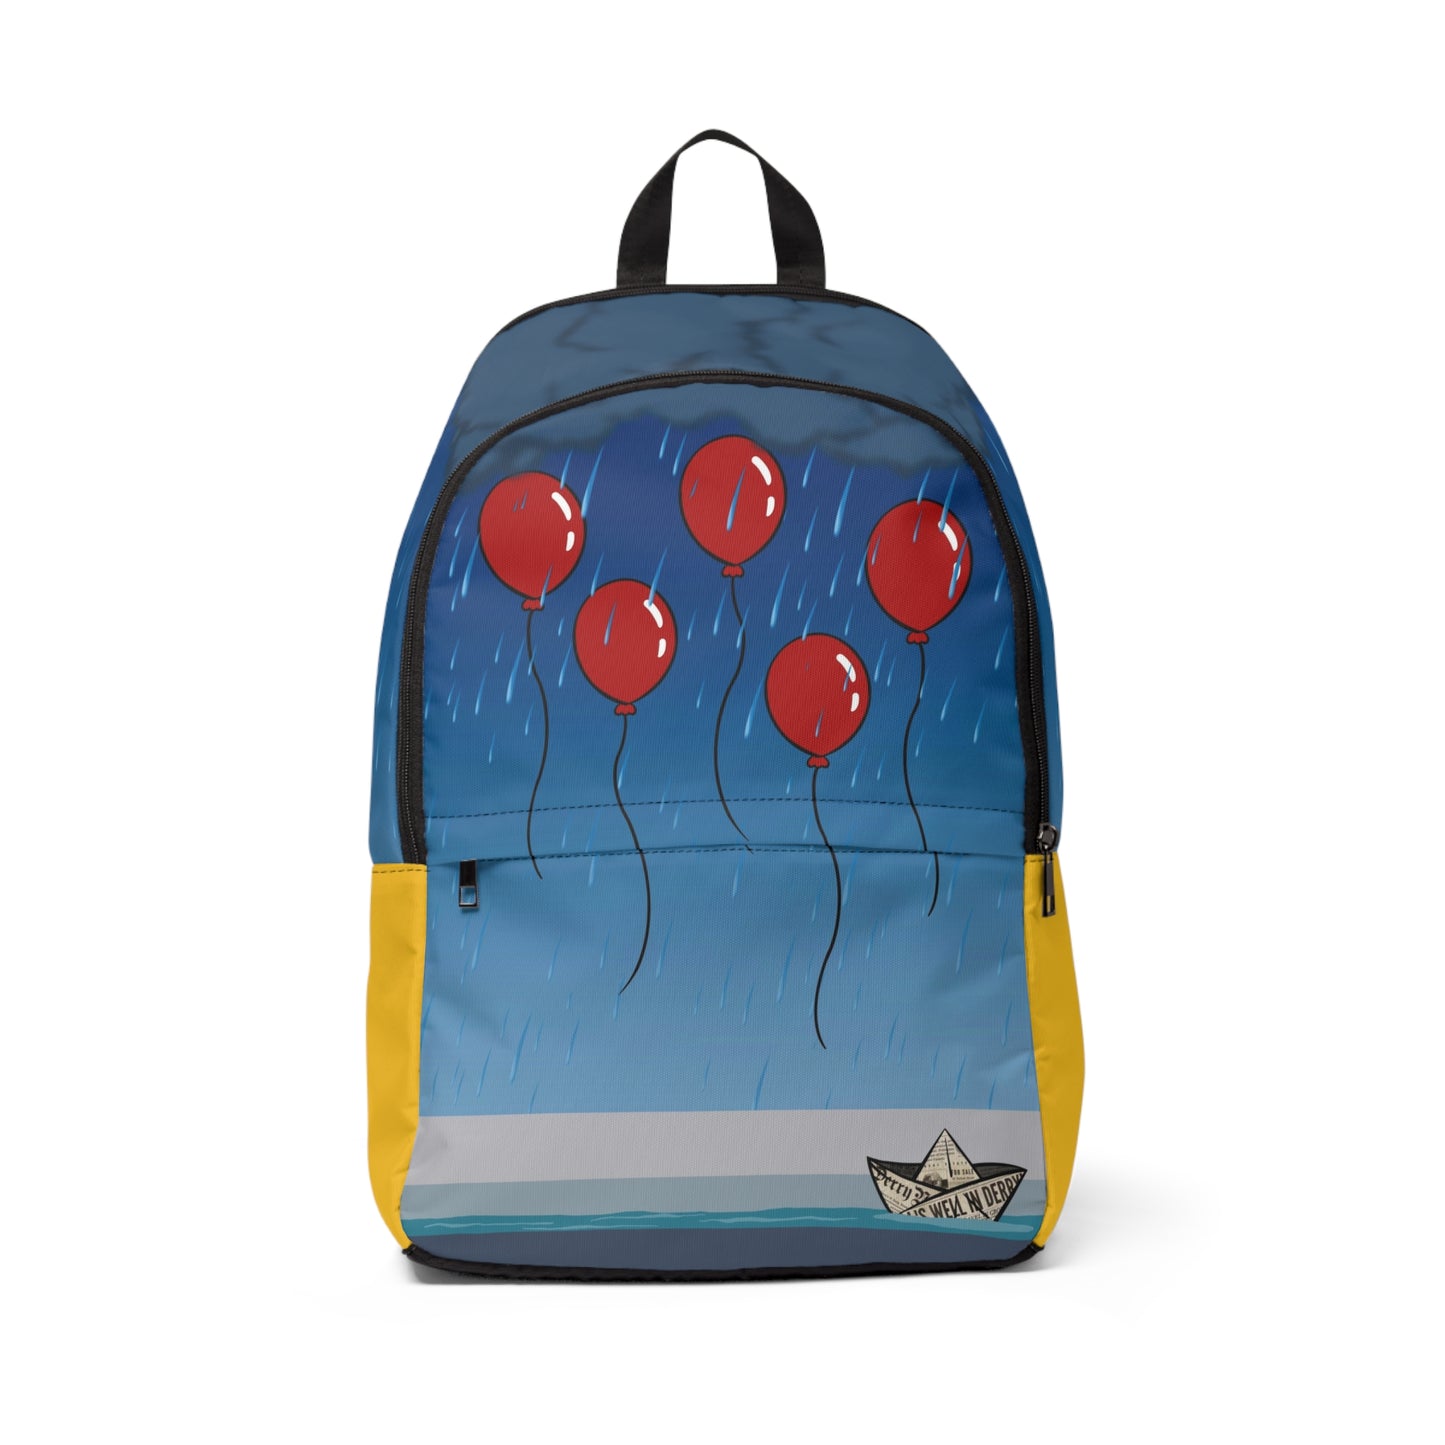 Float on Over Fabric Backpack